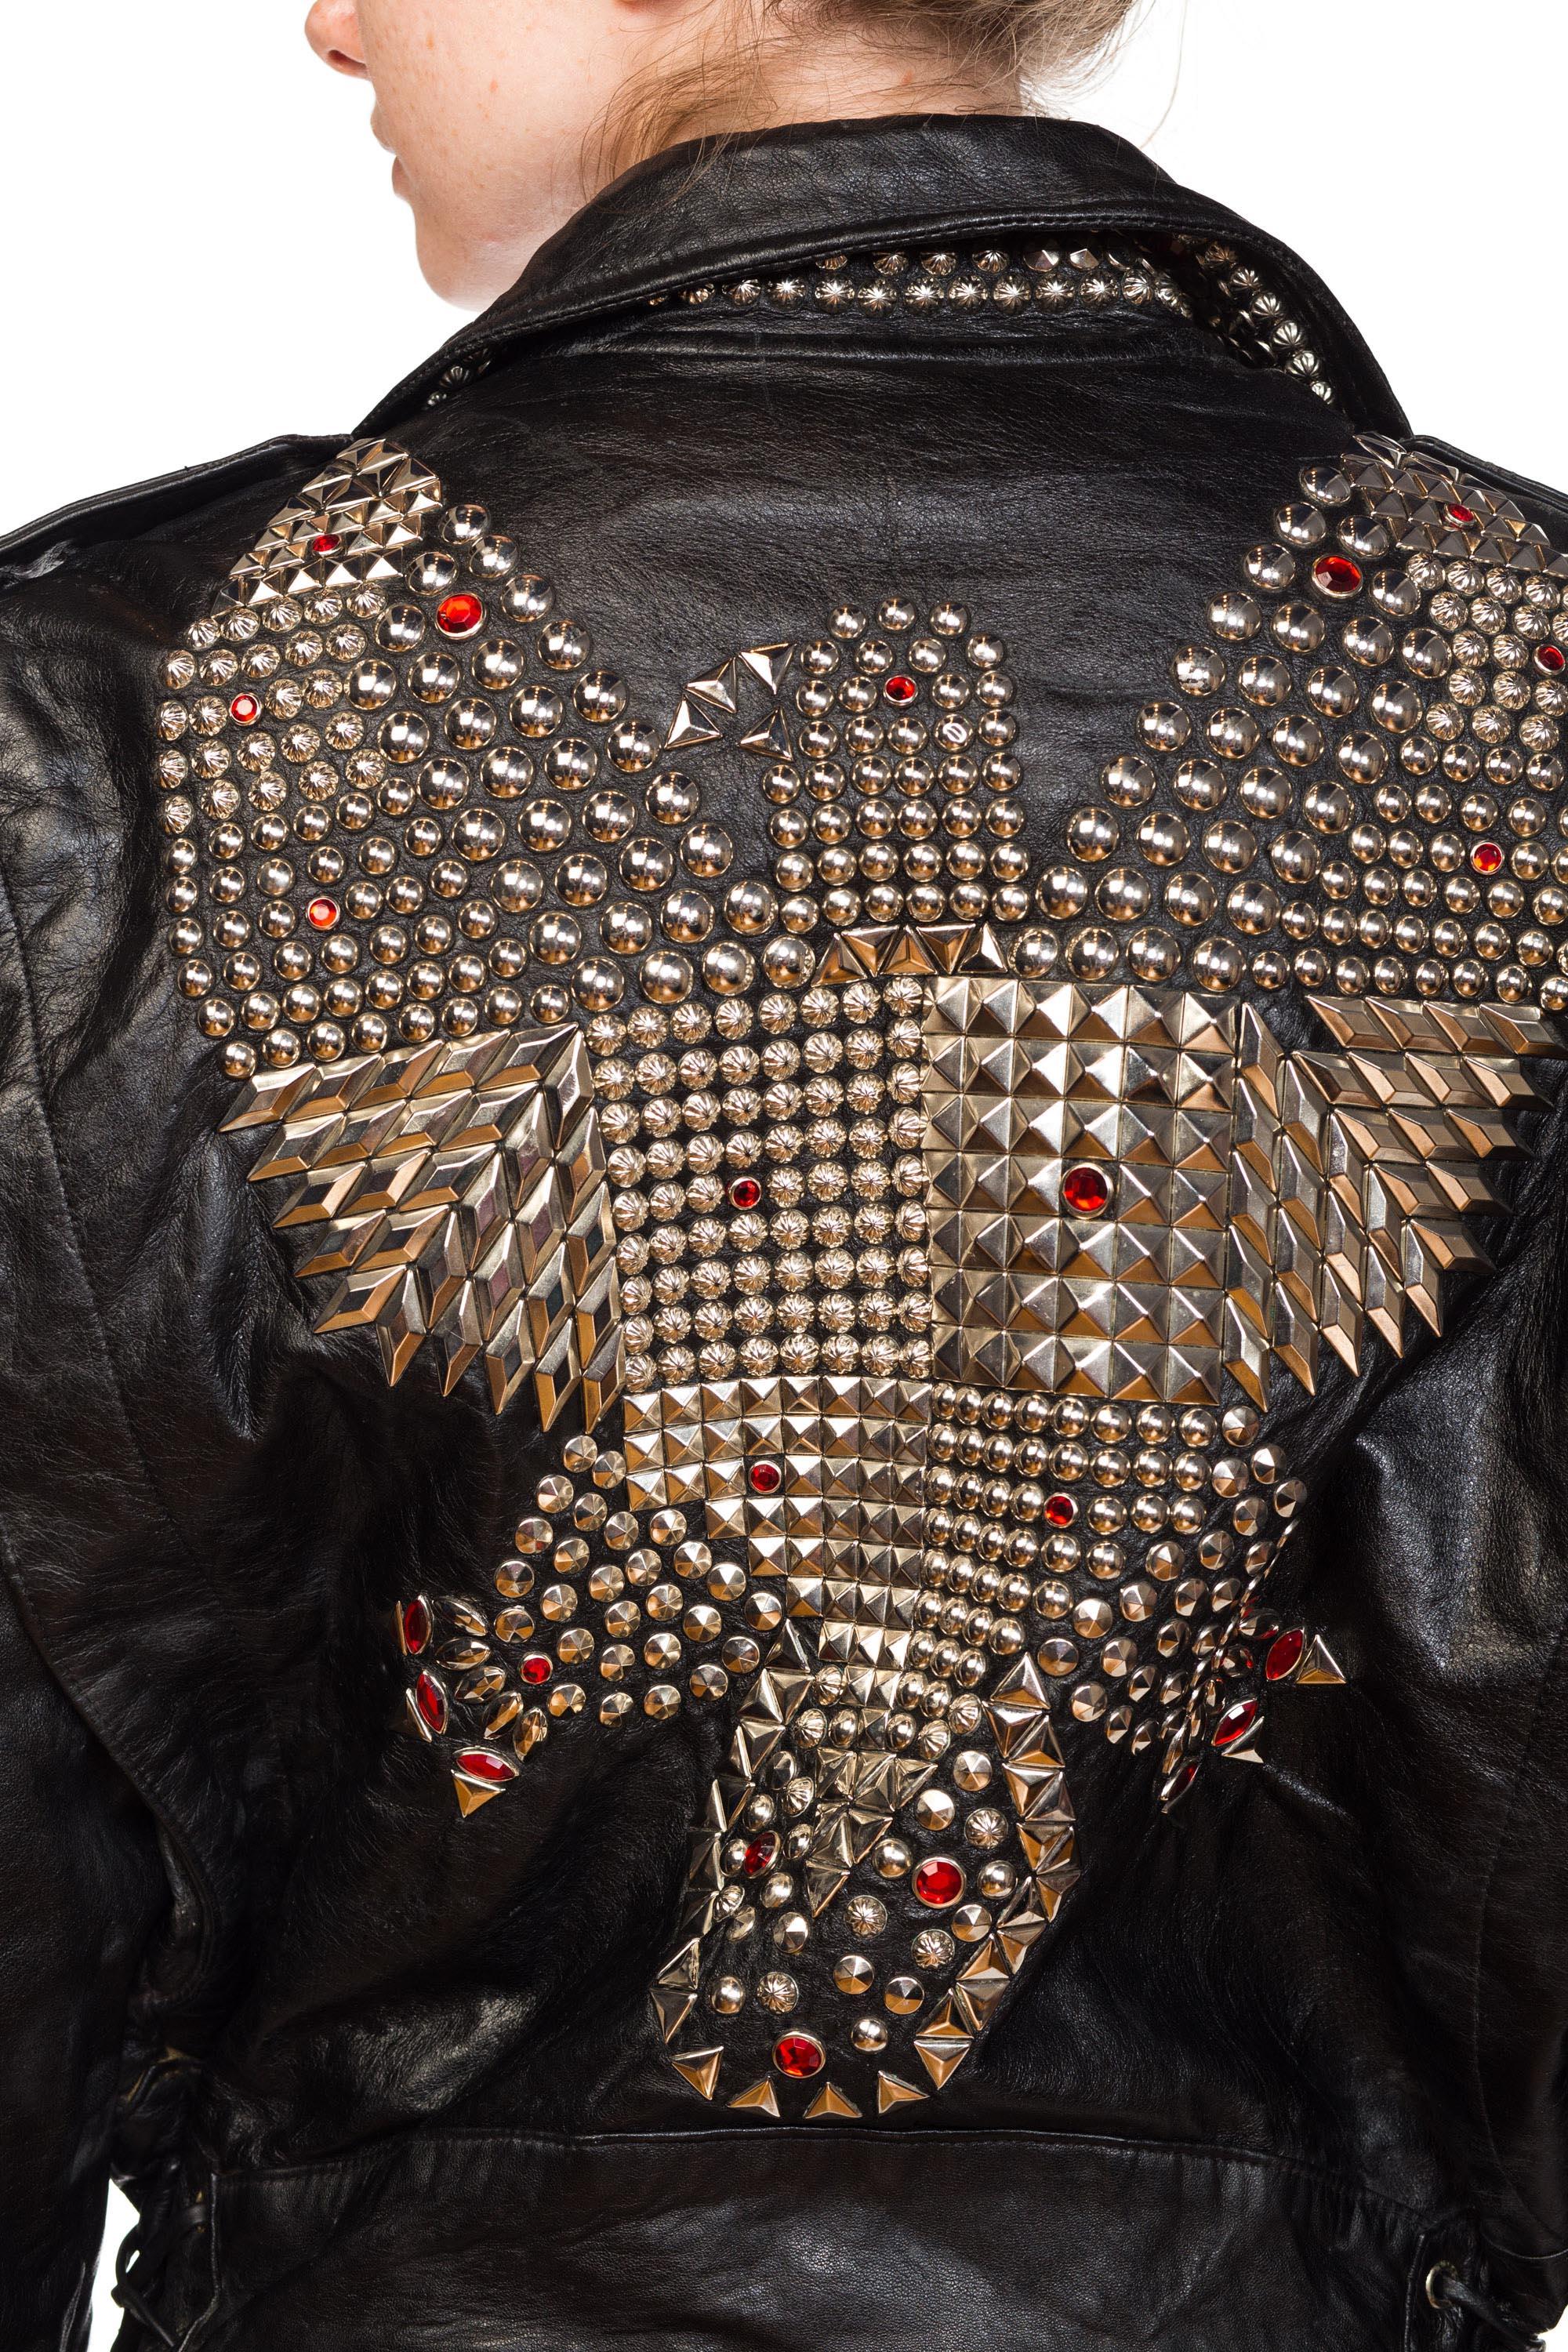 1990S JEFF HAMILTON Men's Studded Leather Biker Jacket With Crystals And Eagle For Sale 2